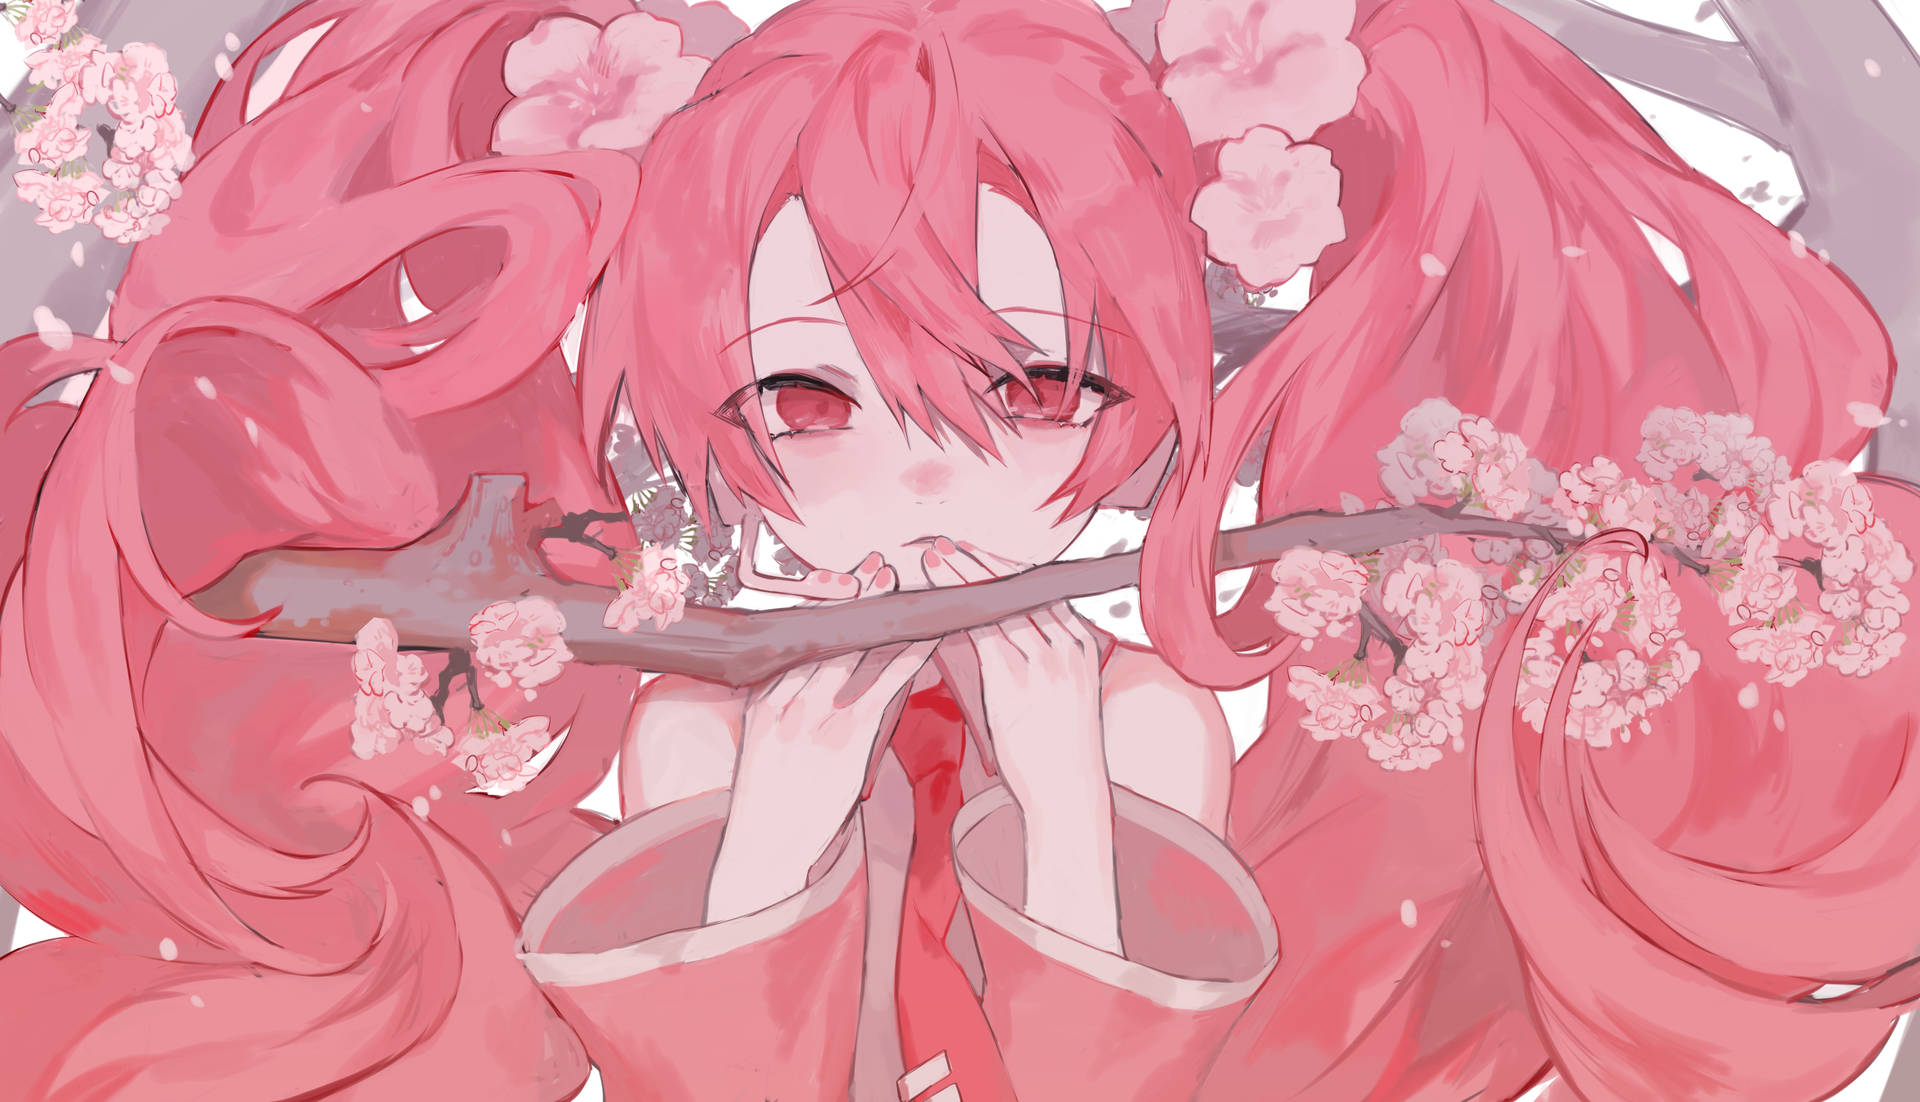 A girl with pink hair holding a cherry branch. - Pink anime